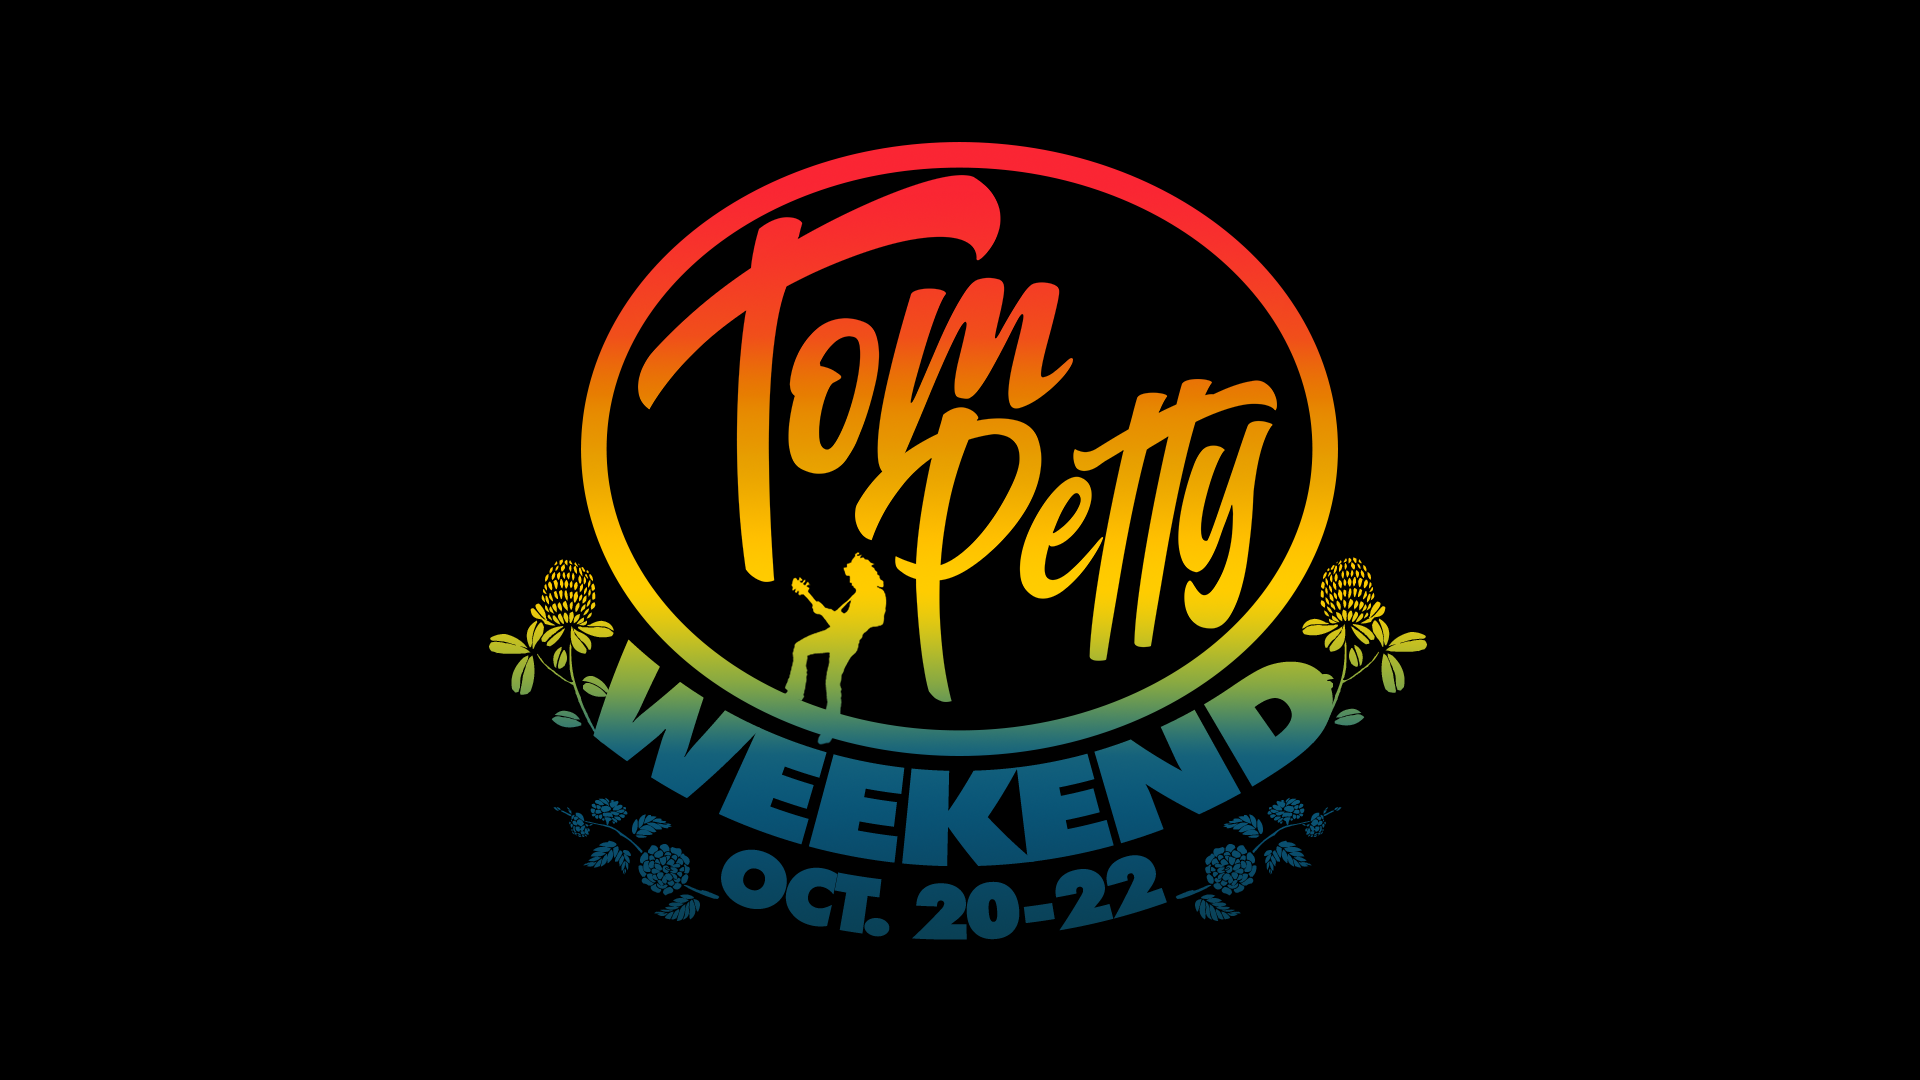 Tom Petty Weekend Heartwood Soundstage